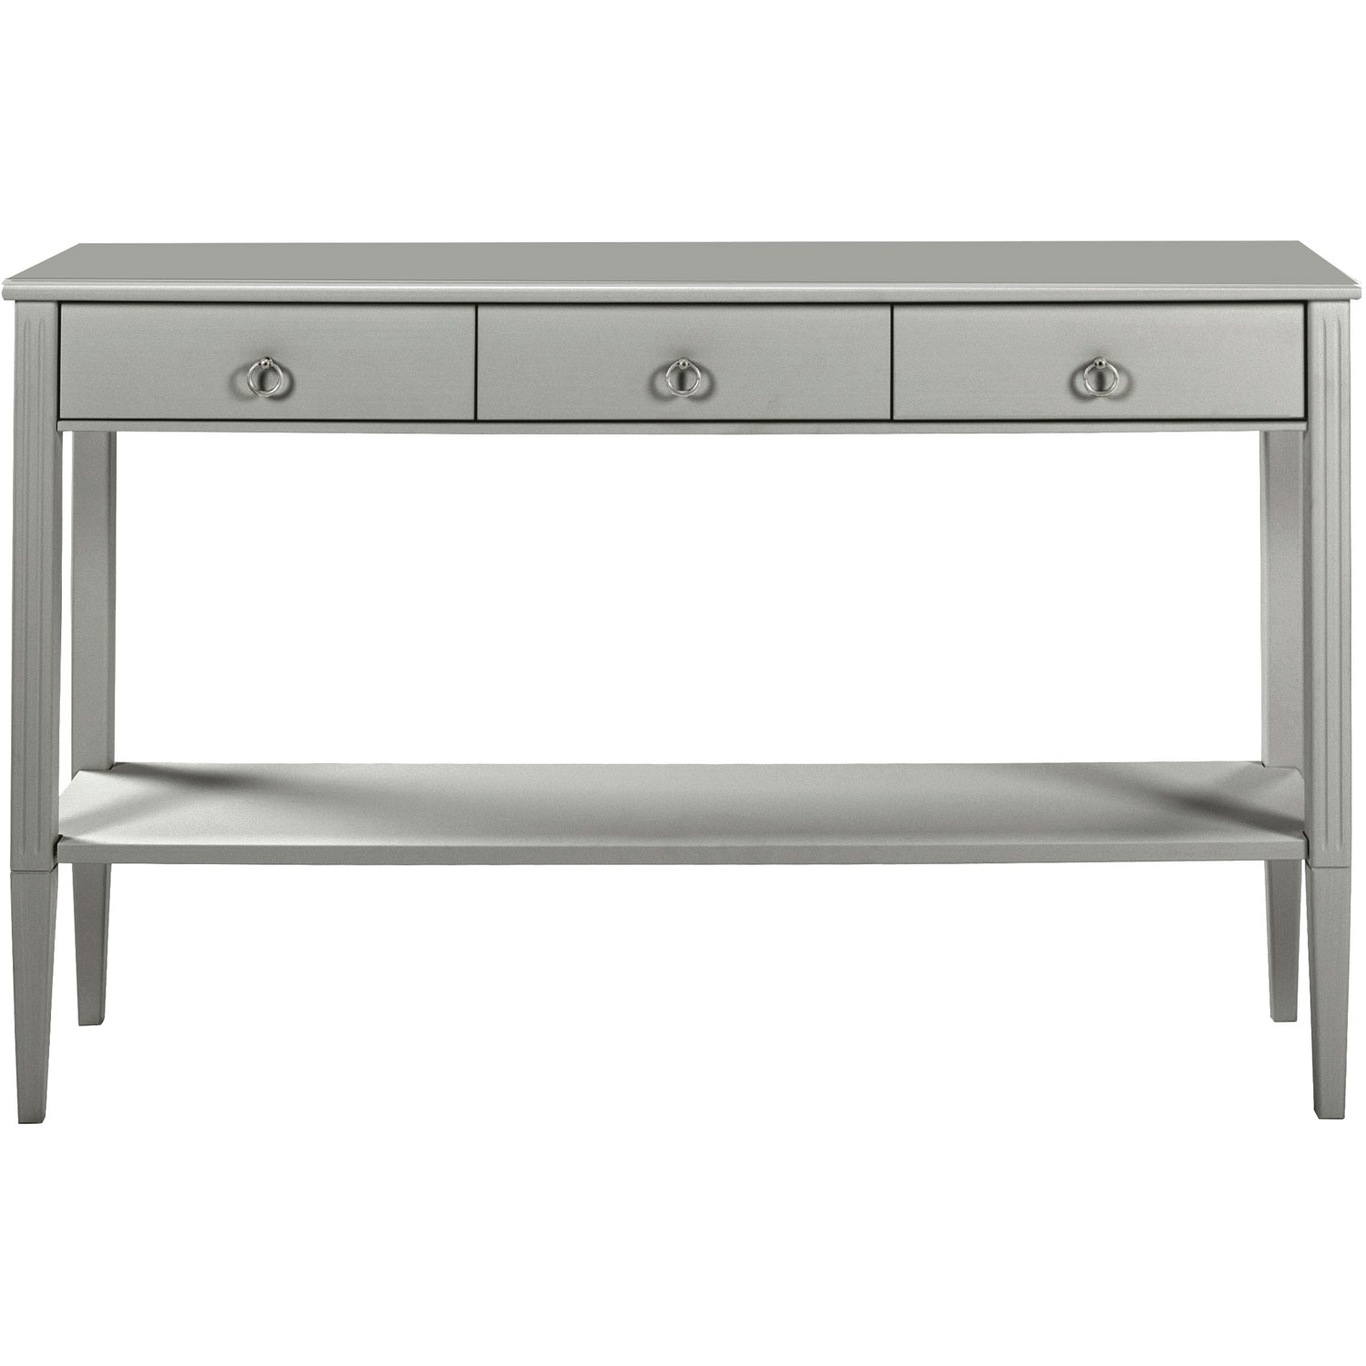 Stockholm 2.0 Side Table 130x34x80, Gray